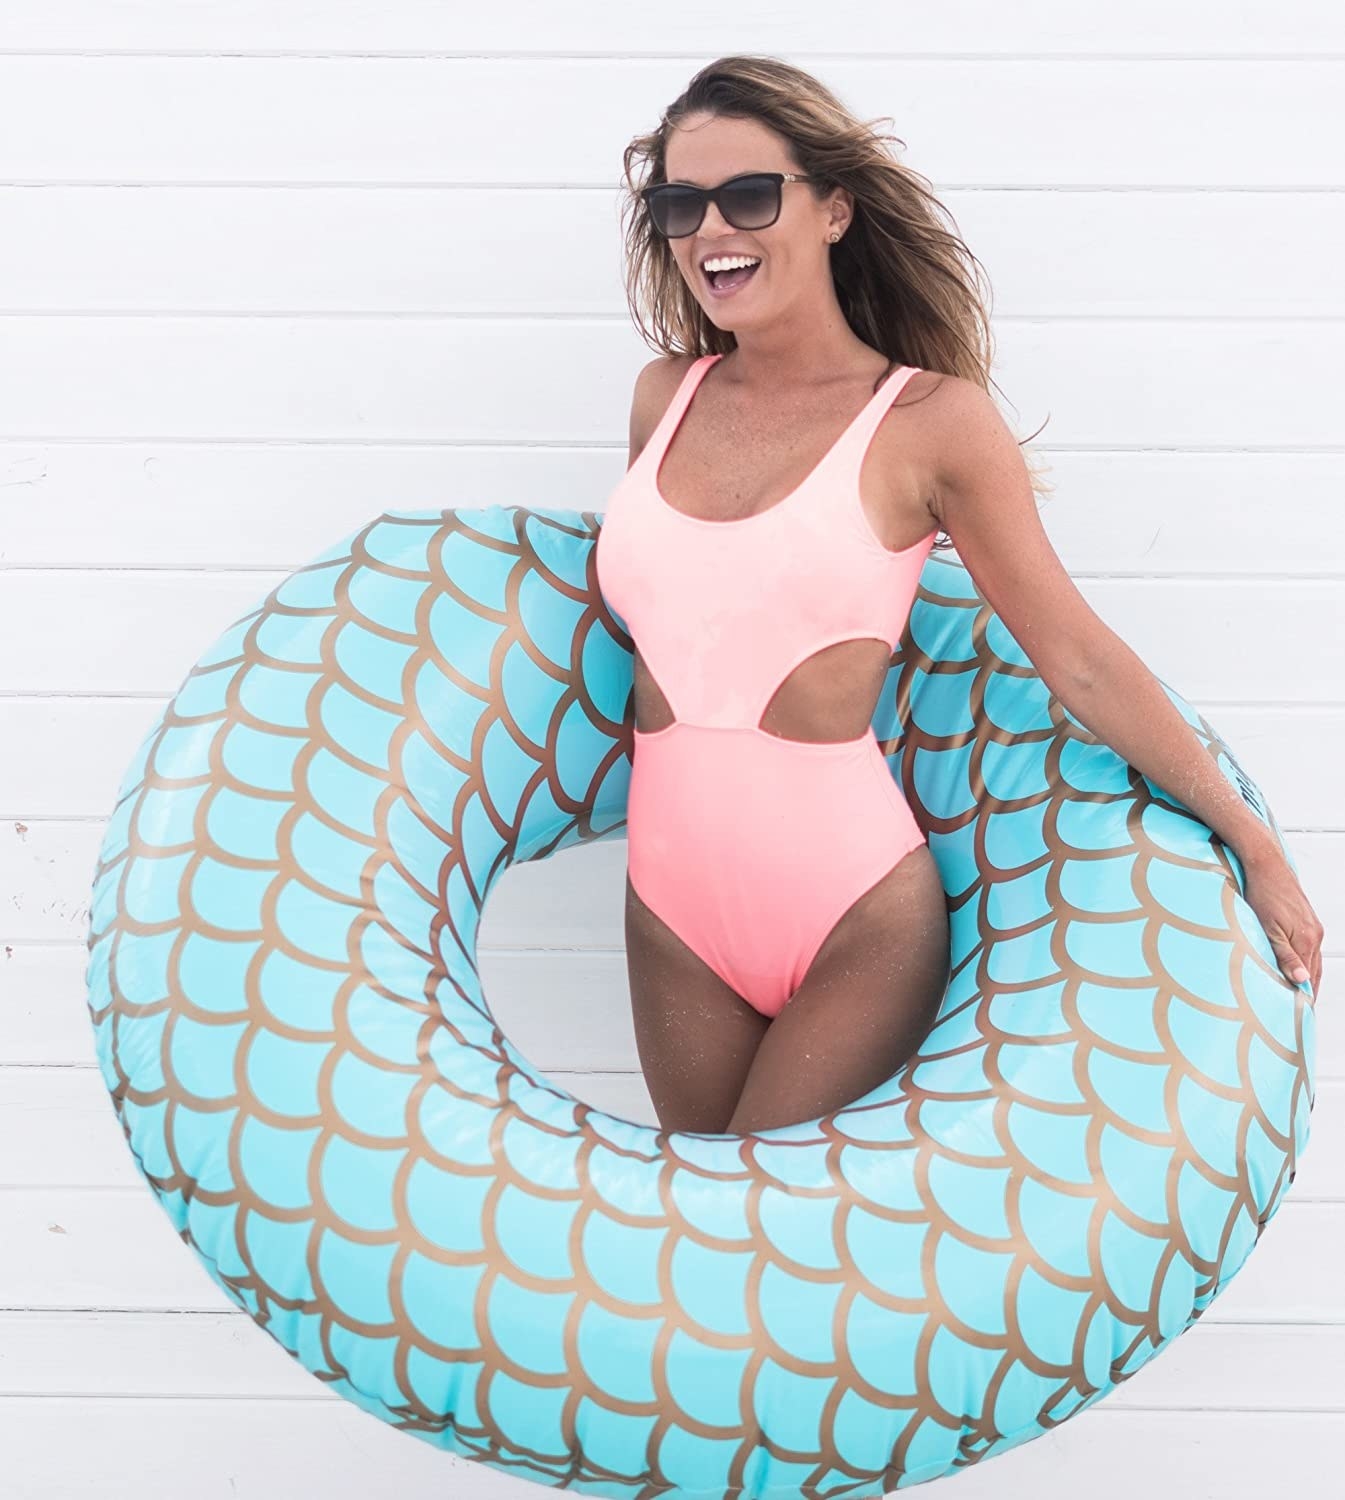 A model wearing the graphic fish scale-patterned pool float